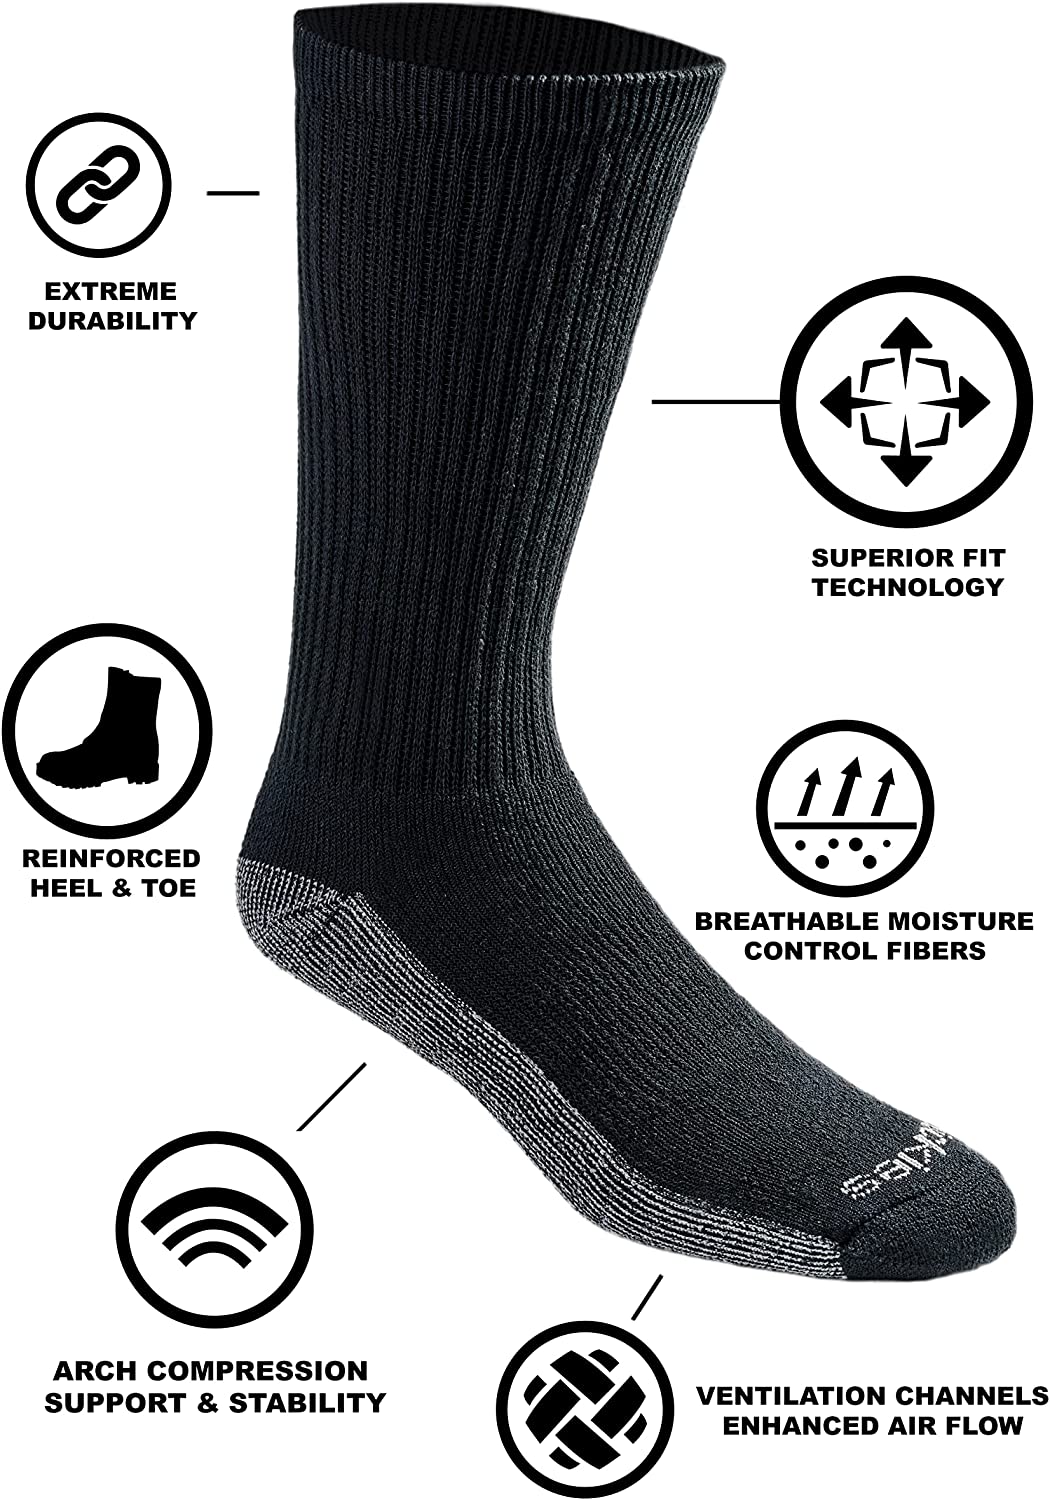 12-Pack Dickies Men's Dri-tech Moisture Control Crew Socks (Charcoal, Large) $16.90 + Free Shipping w/ Prime or on $25+